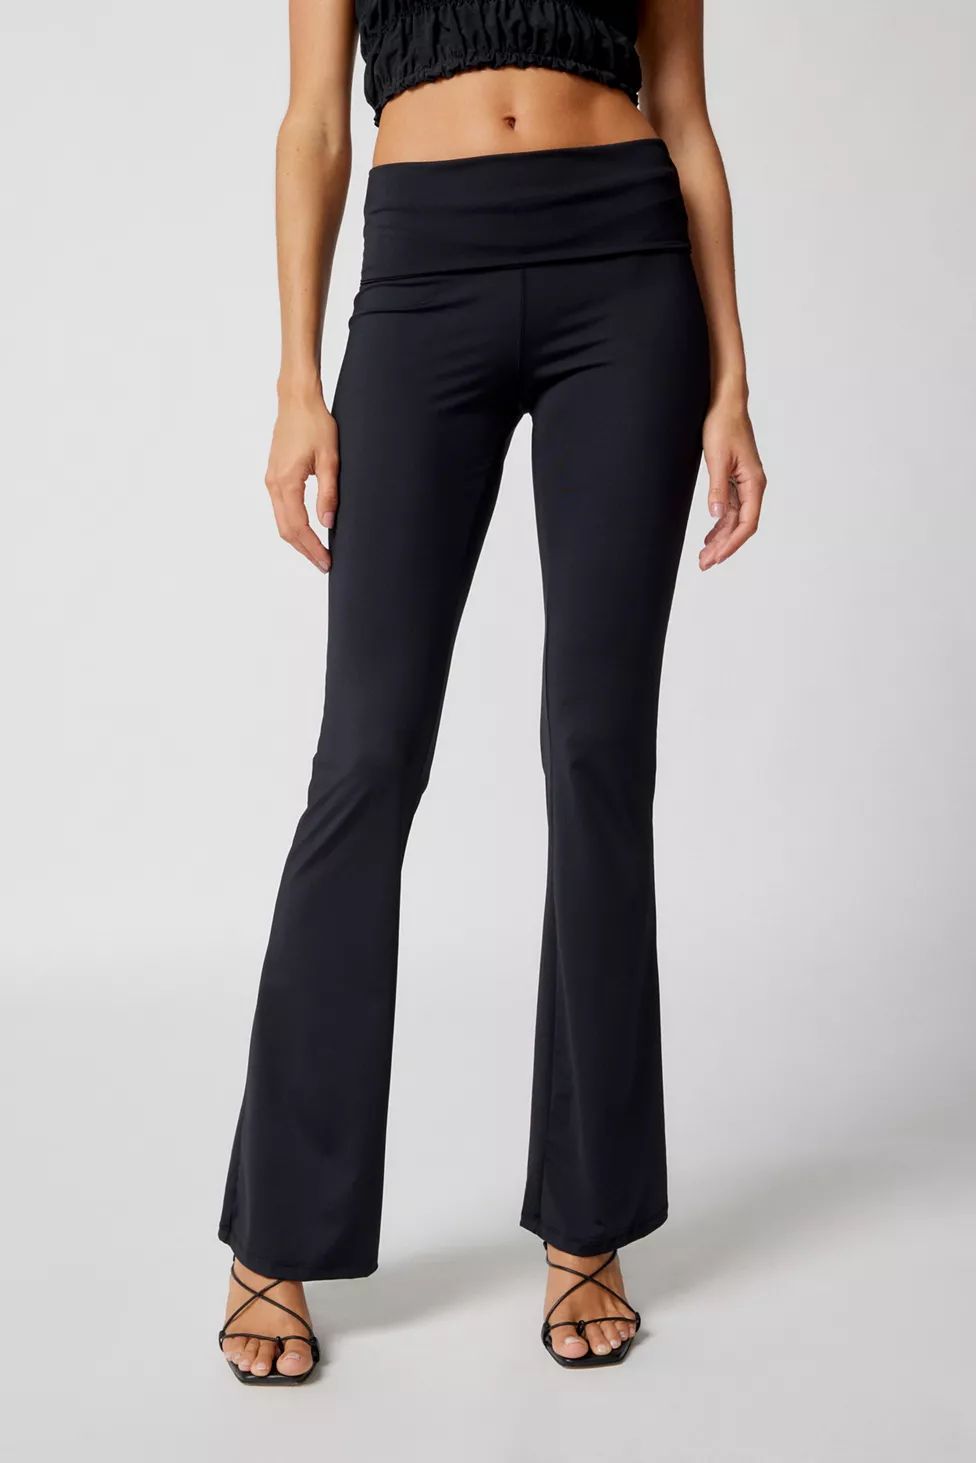 You May Also Like

              
            Beyond Yoga Make The Cut High-Waisted Yoga Pant
   ... | Urban Outfitters (US and RoW)